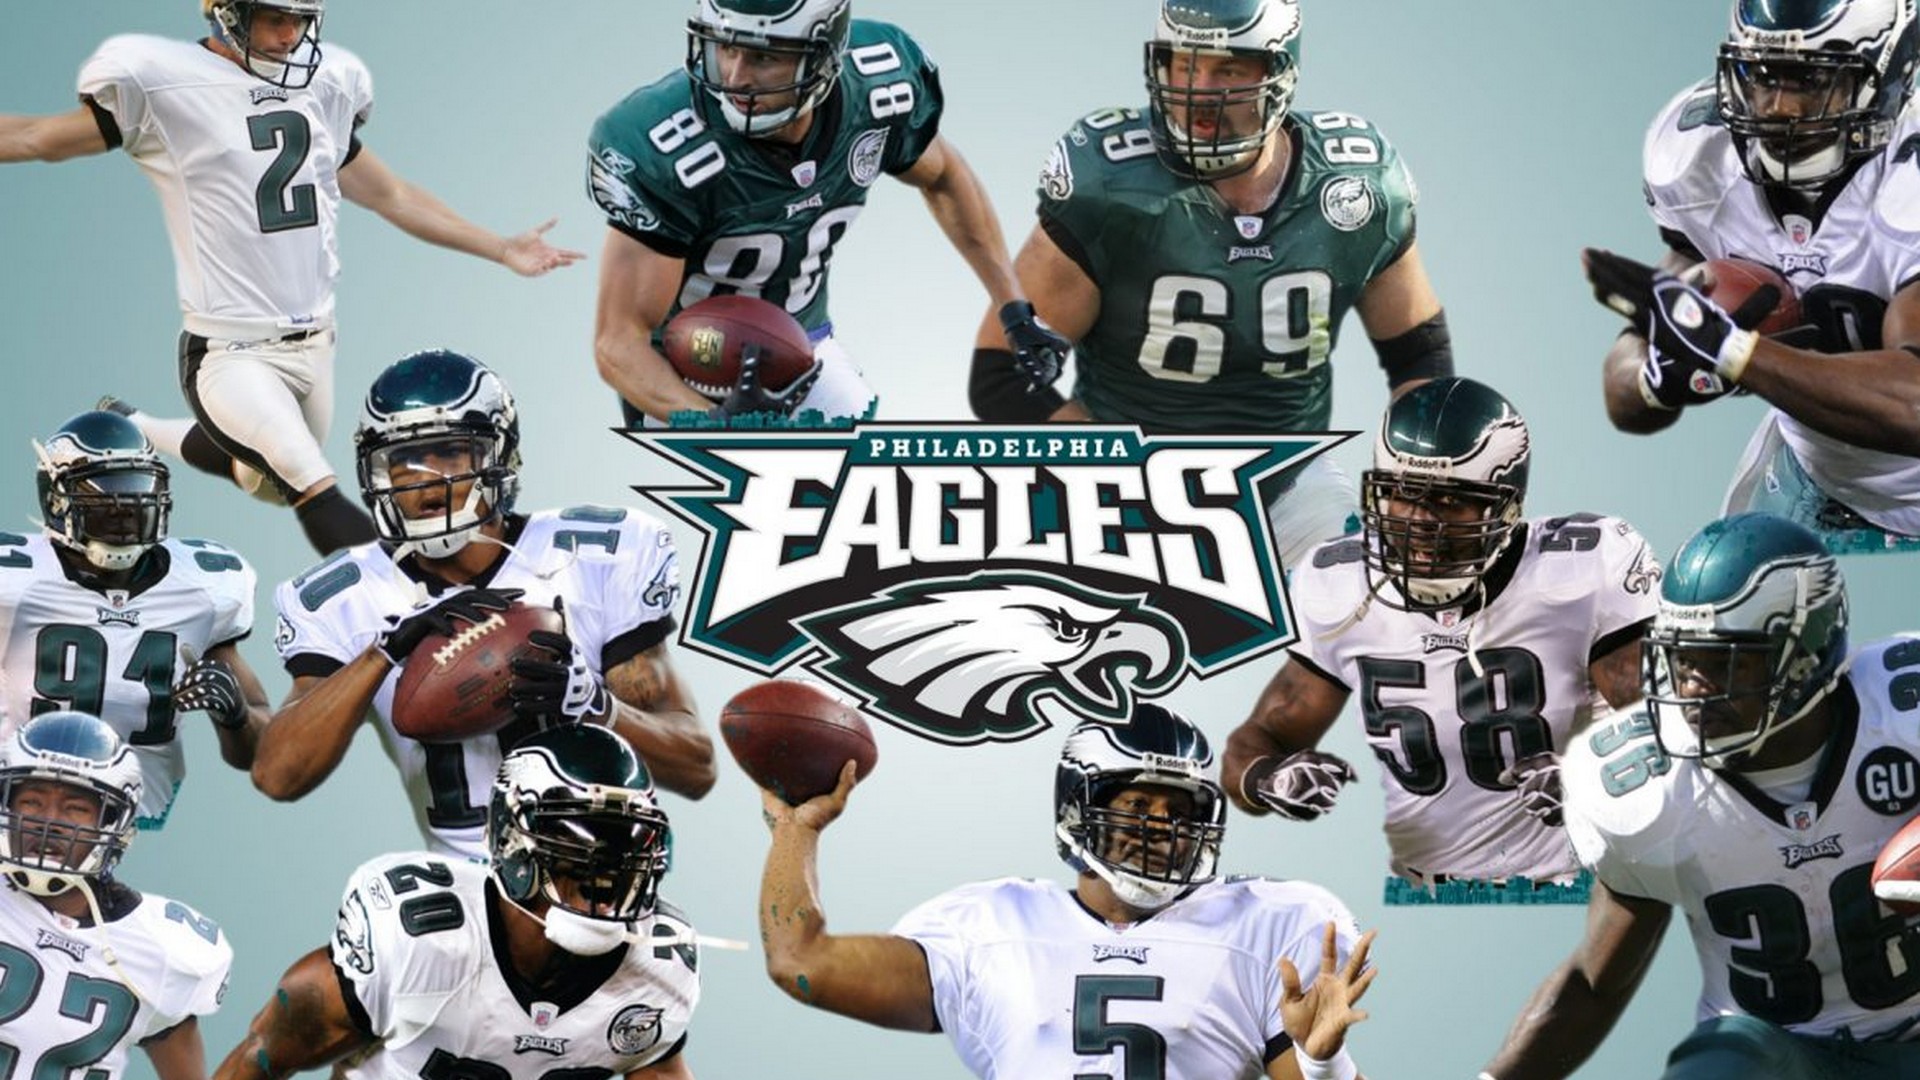 Wallpaper Desktop NFL Eagles HD With Resolution 1920X1080 pixel. You can make this wallpaper for your Mac or Windows Desktop Background, iPhone, Android or Tablet and another Smartphone device for free